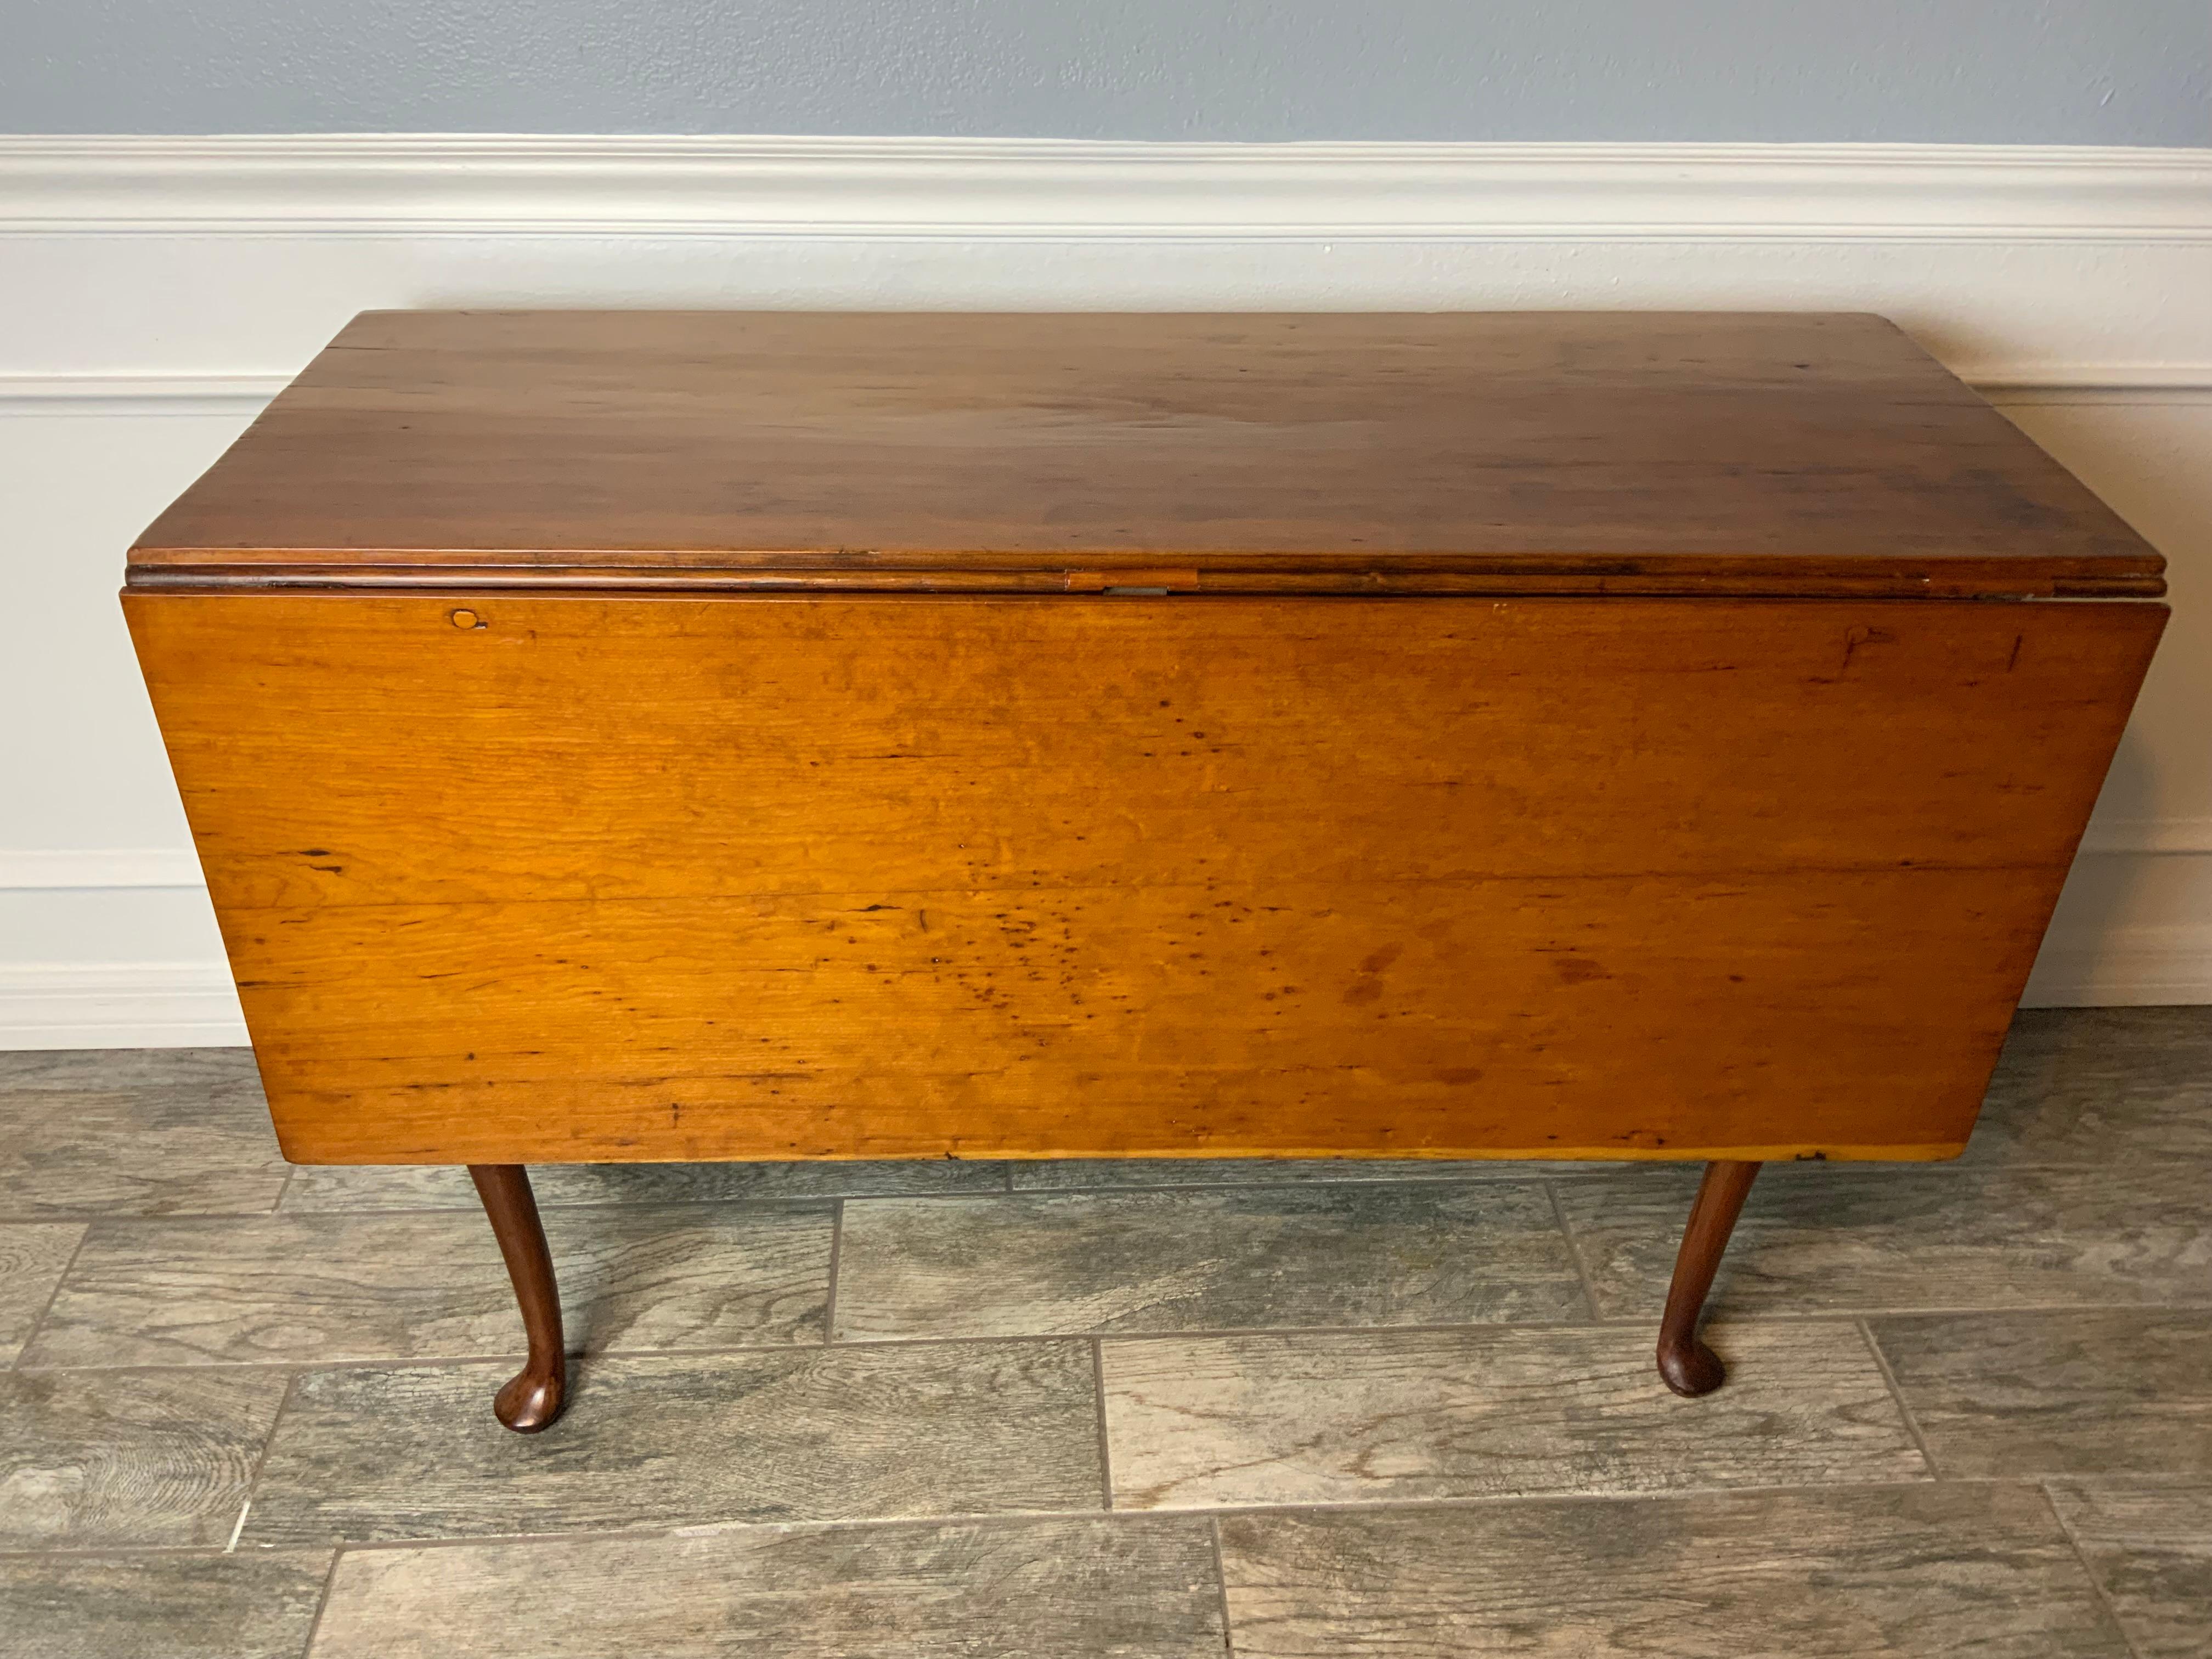 New England Cherry Queen Anne swing leg drop leaf table. Excellent color and patina to the old Cherry tops. Dovetailed case with slender cabriole legs ending in pad feet. Old refinish in very good condition. Looks to be an early marriage of tops and